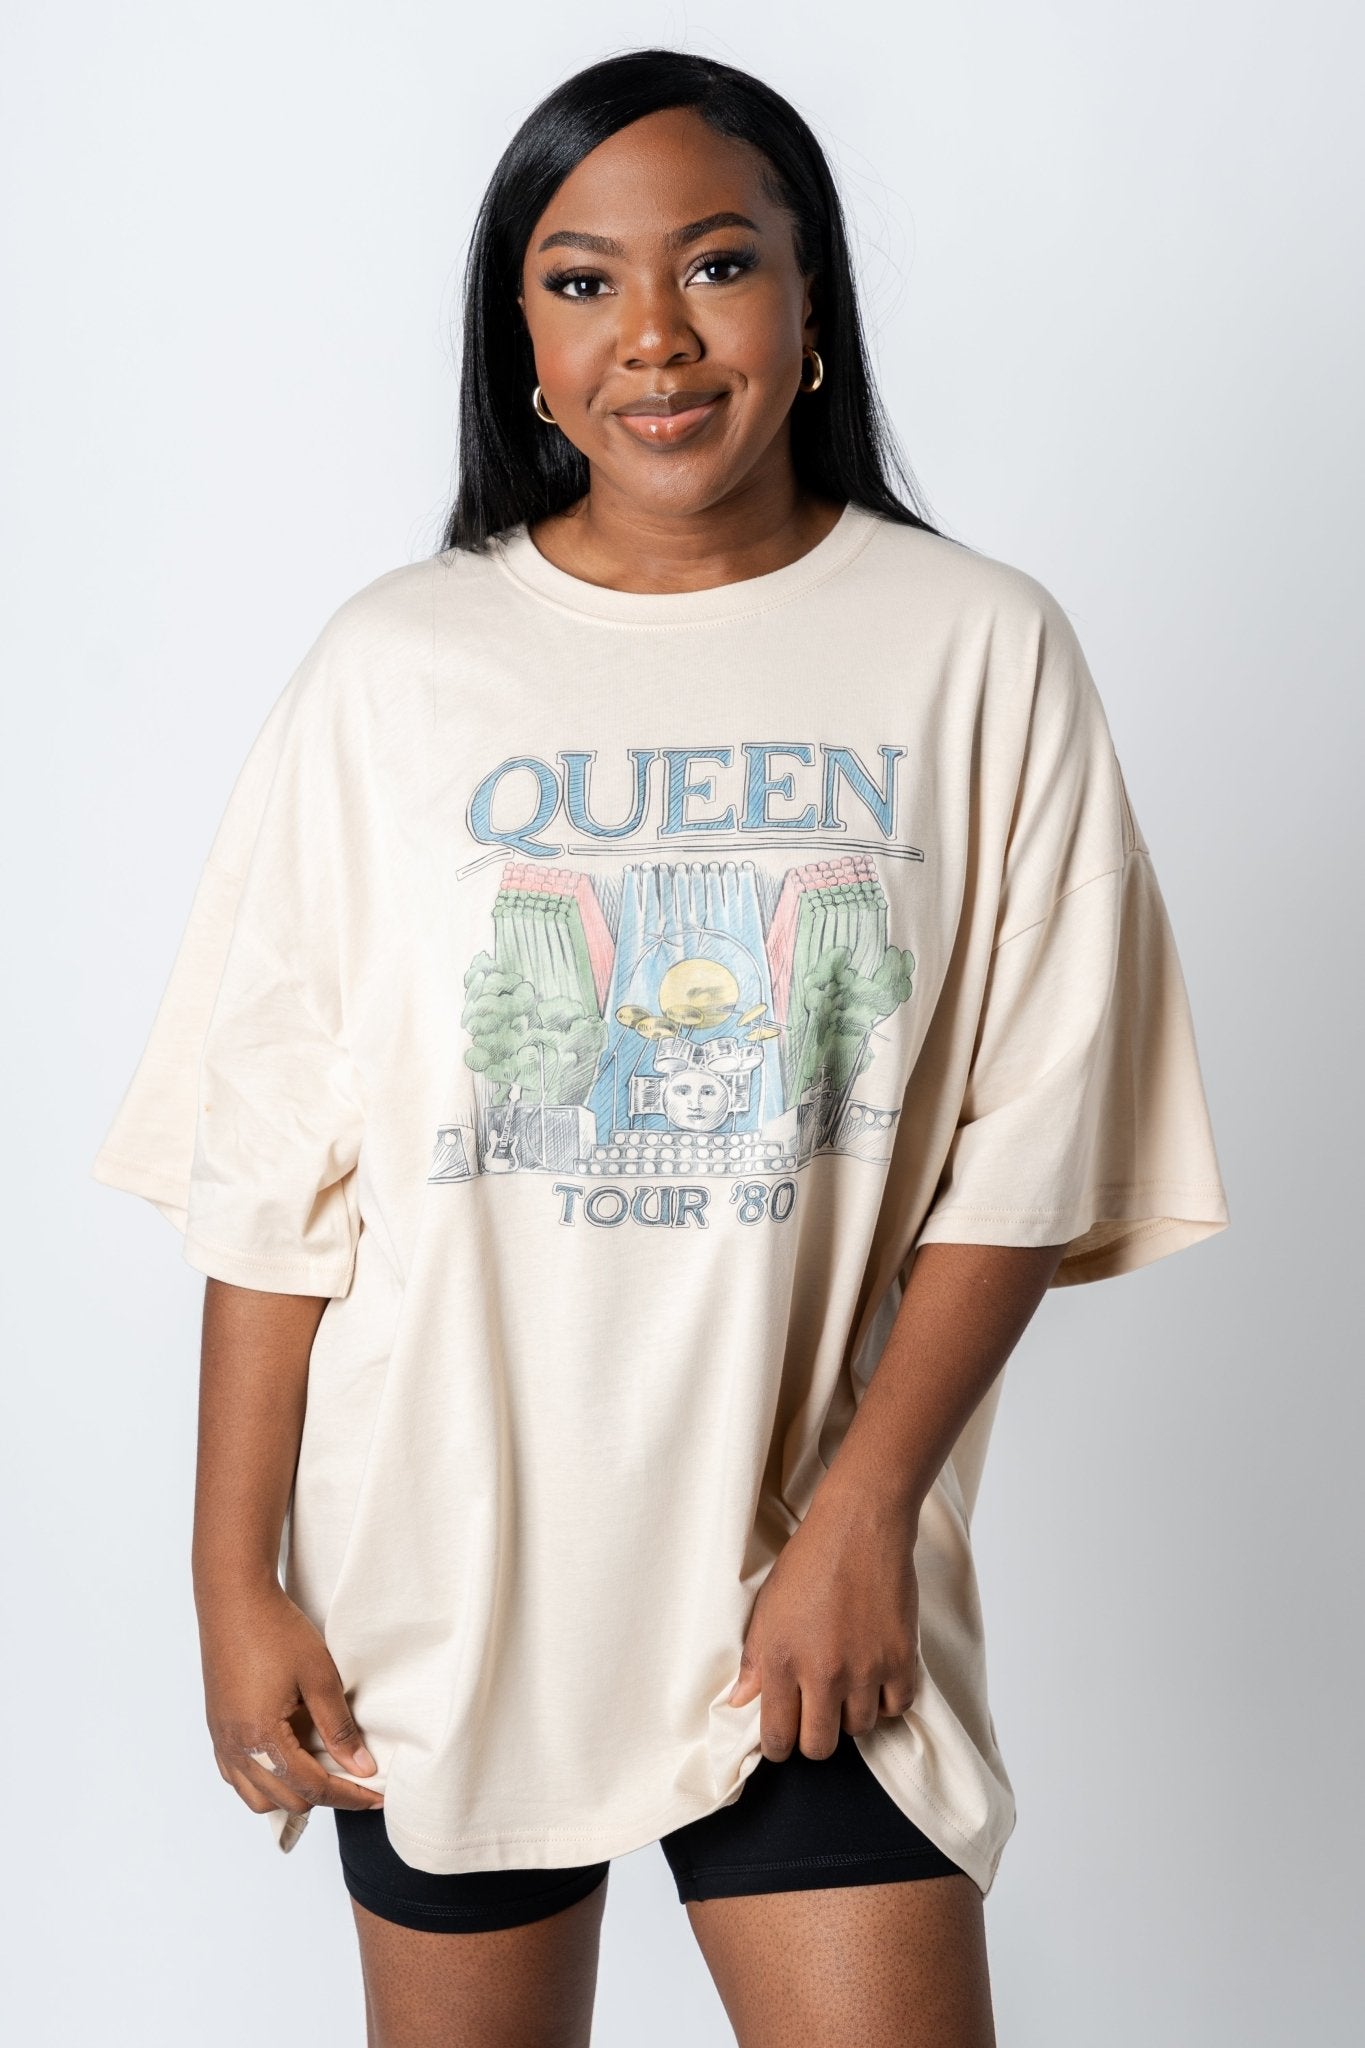 Queen 1980 tour oversized graphic tee off white - Stylish Band T-Shirts and Sweatshirts at Lush Fashion Lounge Boutique in Oklahoma City